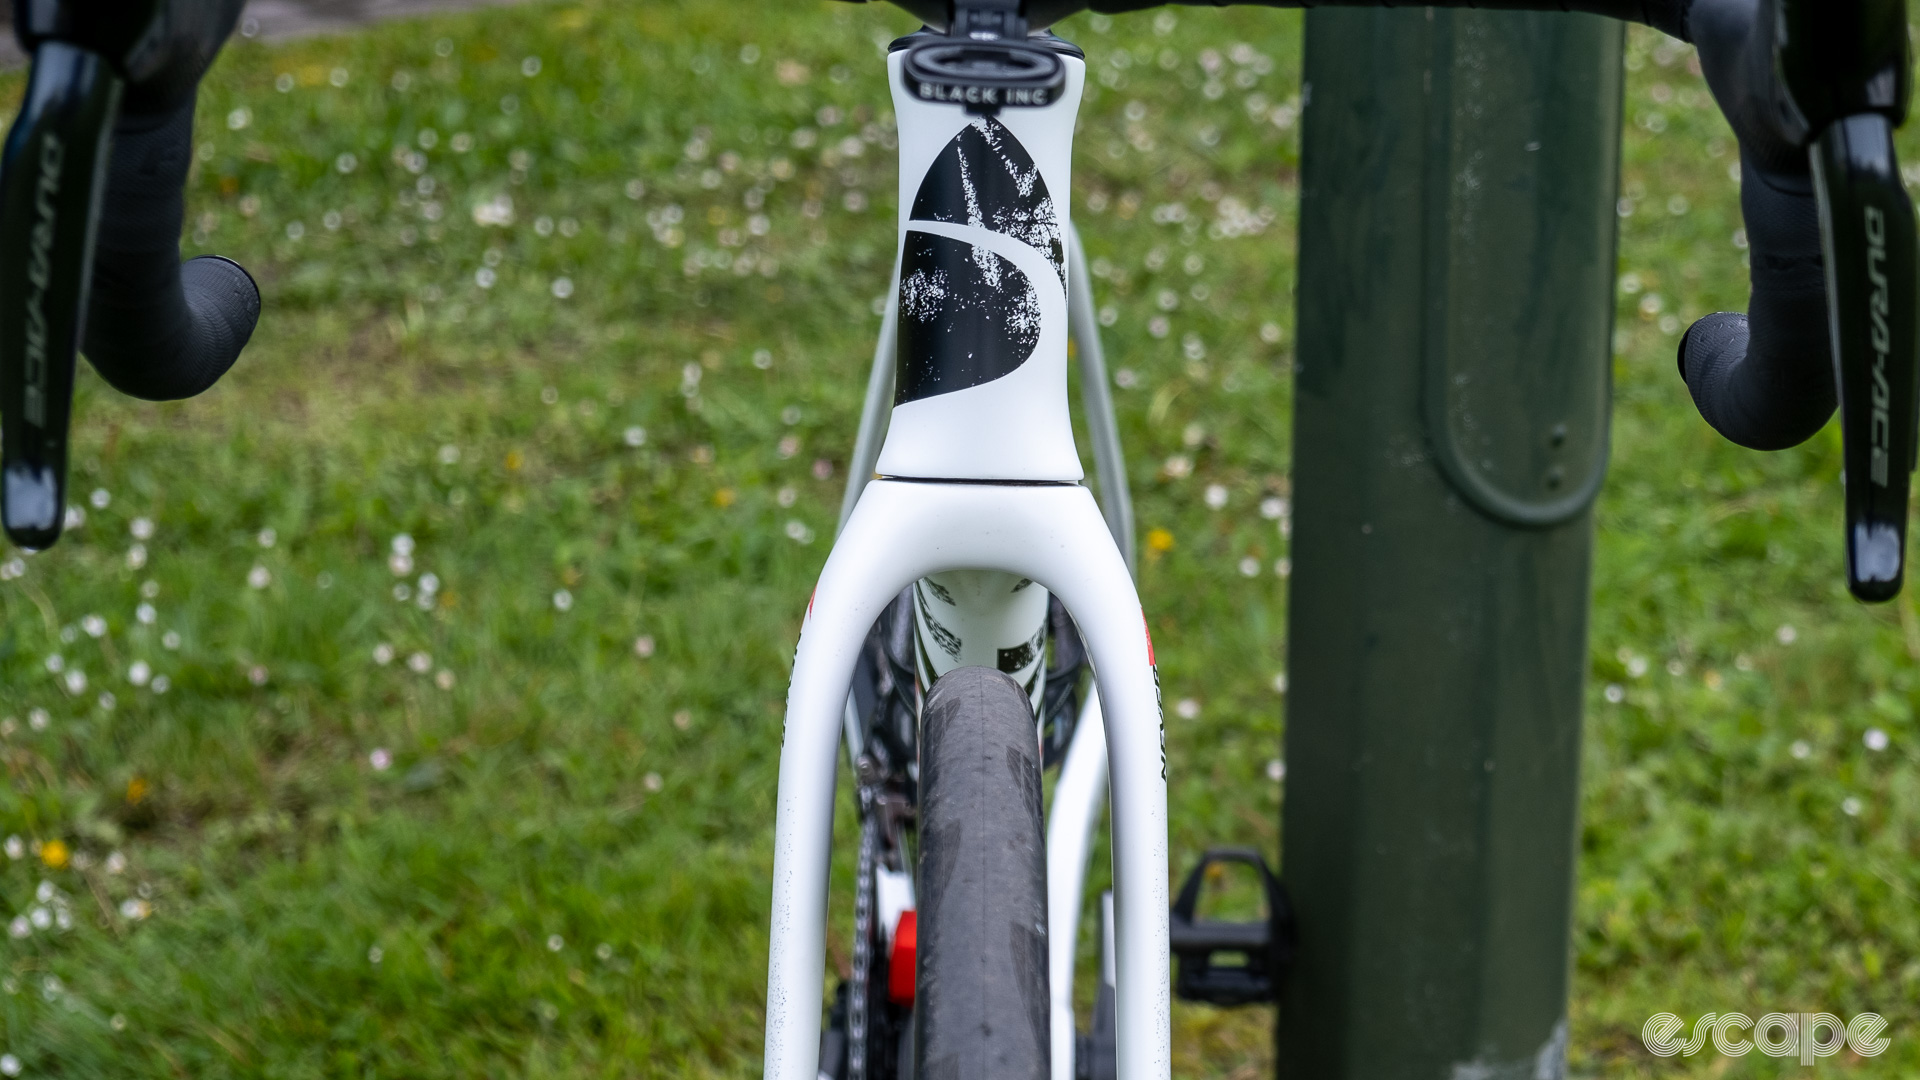 The image shows Riley Sheehan’s Factor Ostro Gravel.